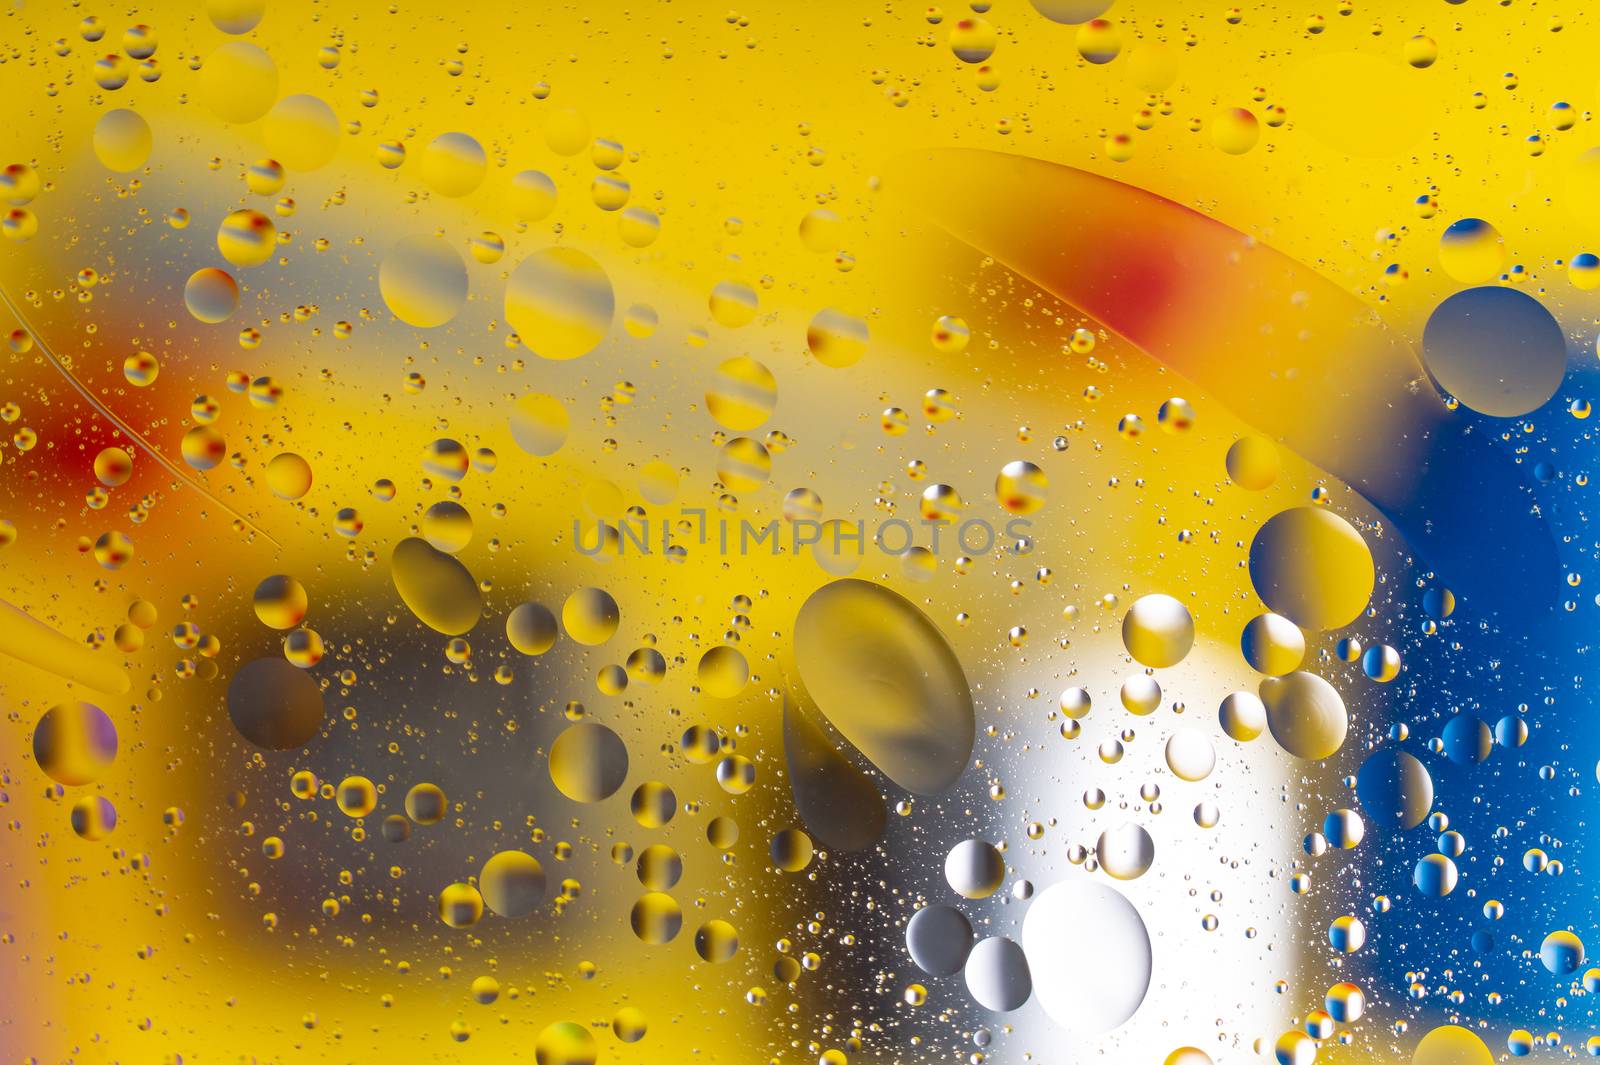 The abstract composition with oil drops in water. Yellow main color.